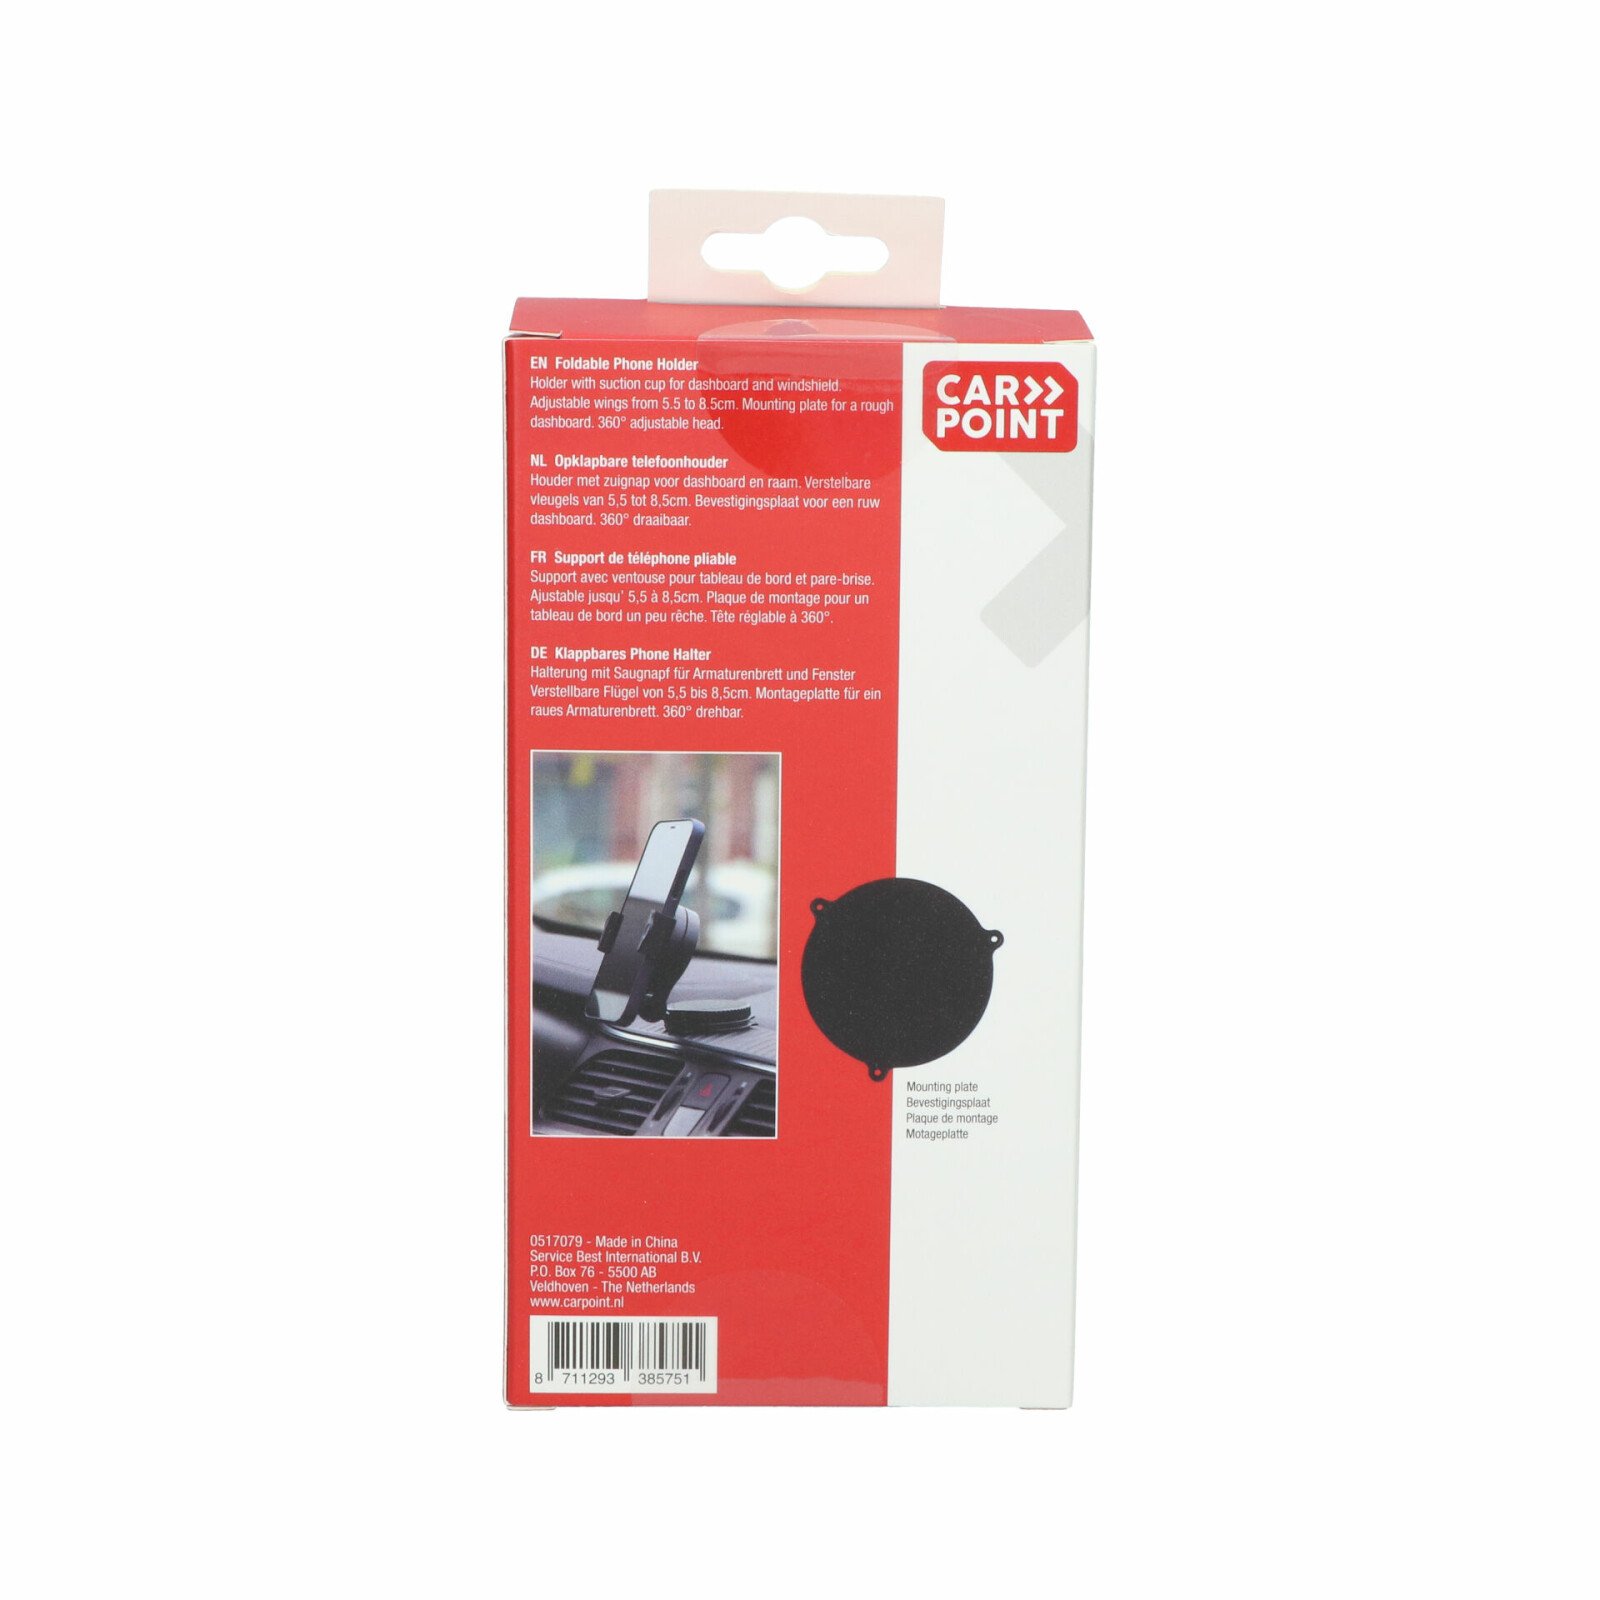 Mobile phone holder with suction cup, width 55-85mm, Carpoint - Black thumb